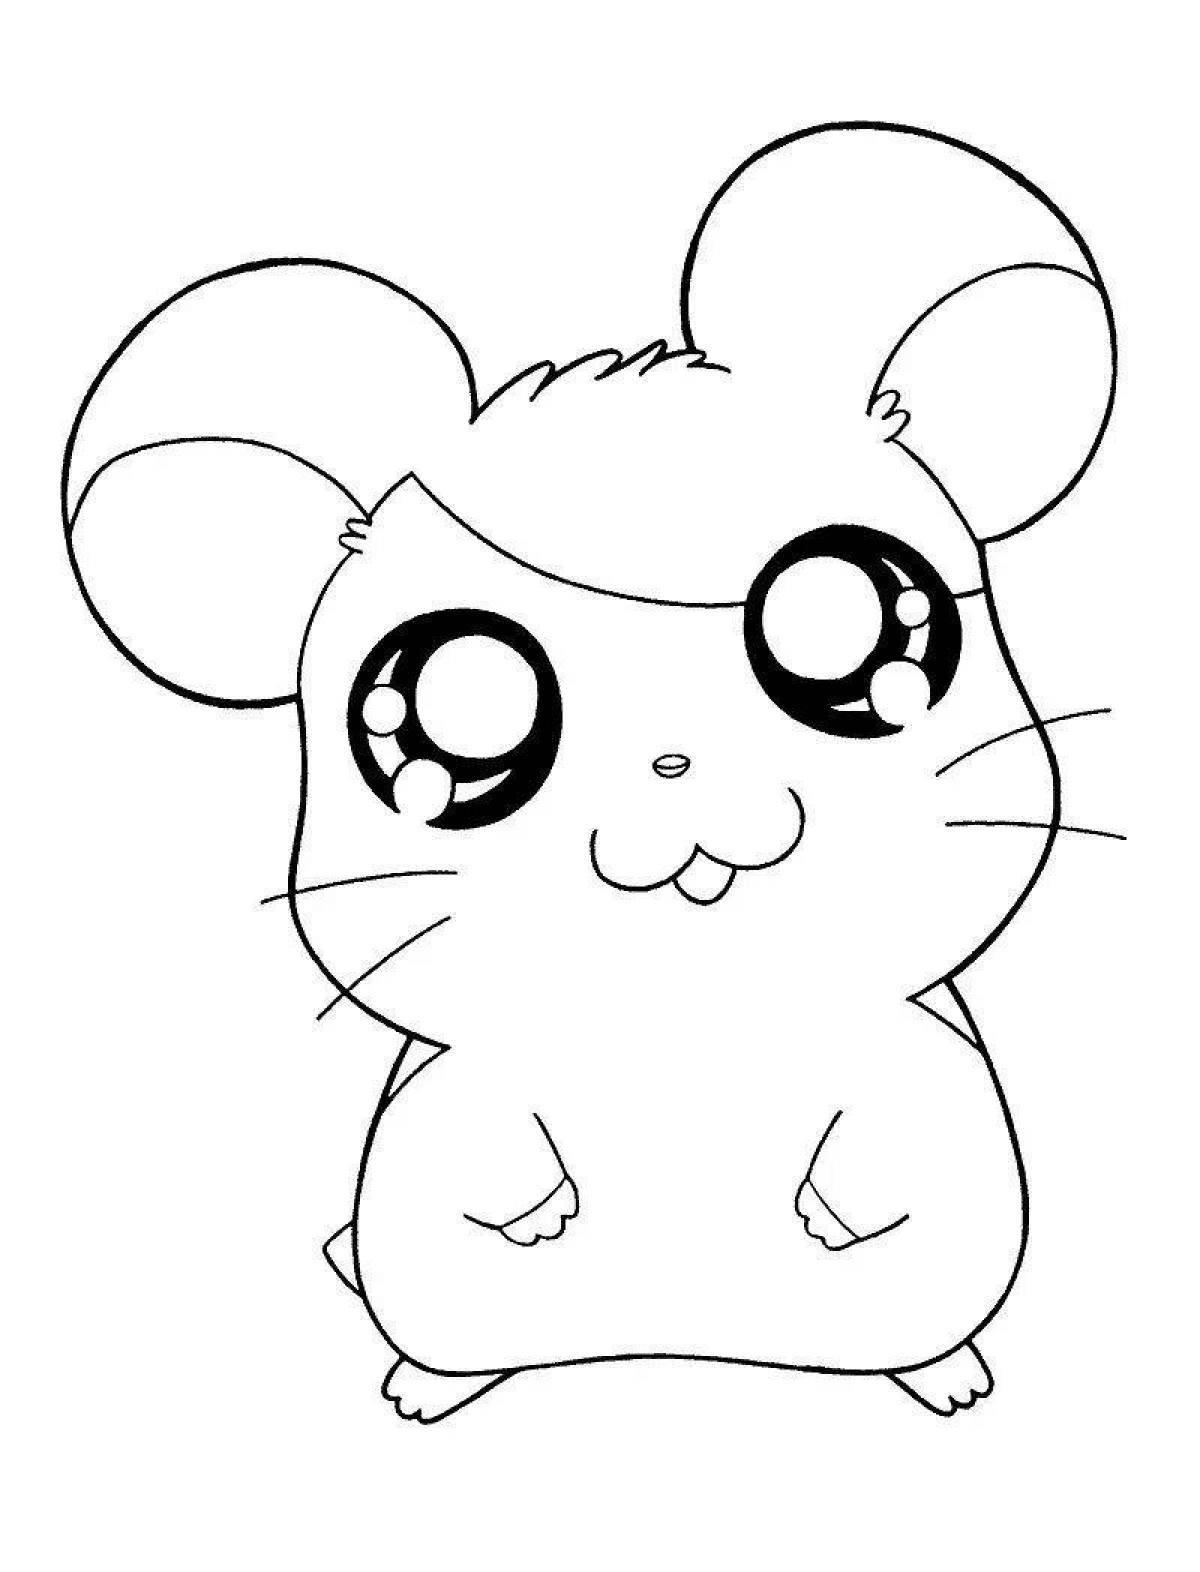 Fun mouse coloring pages